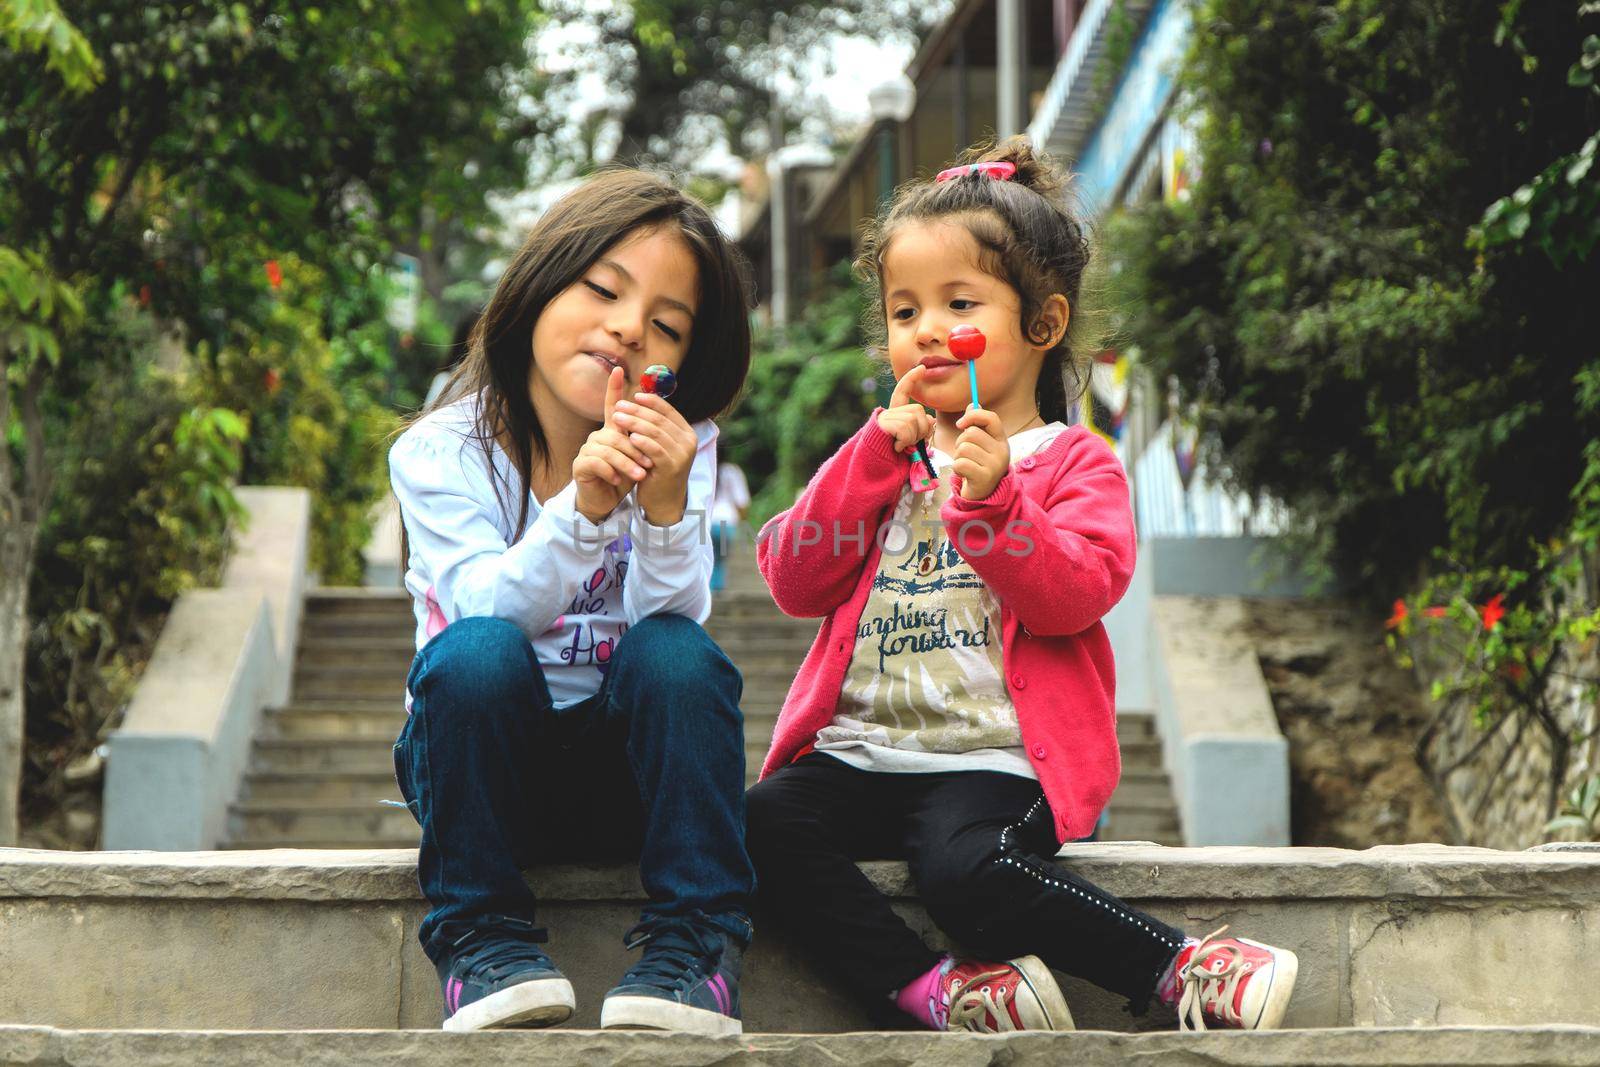 Two girls sitting and eating a lollipop in the park, summer outdoor portrait. best friends